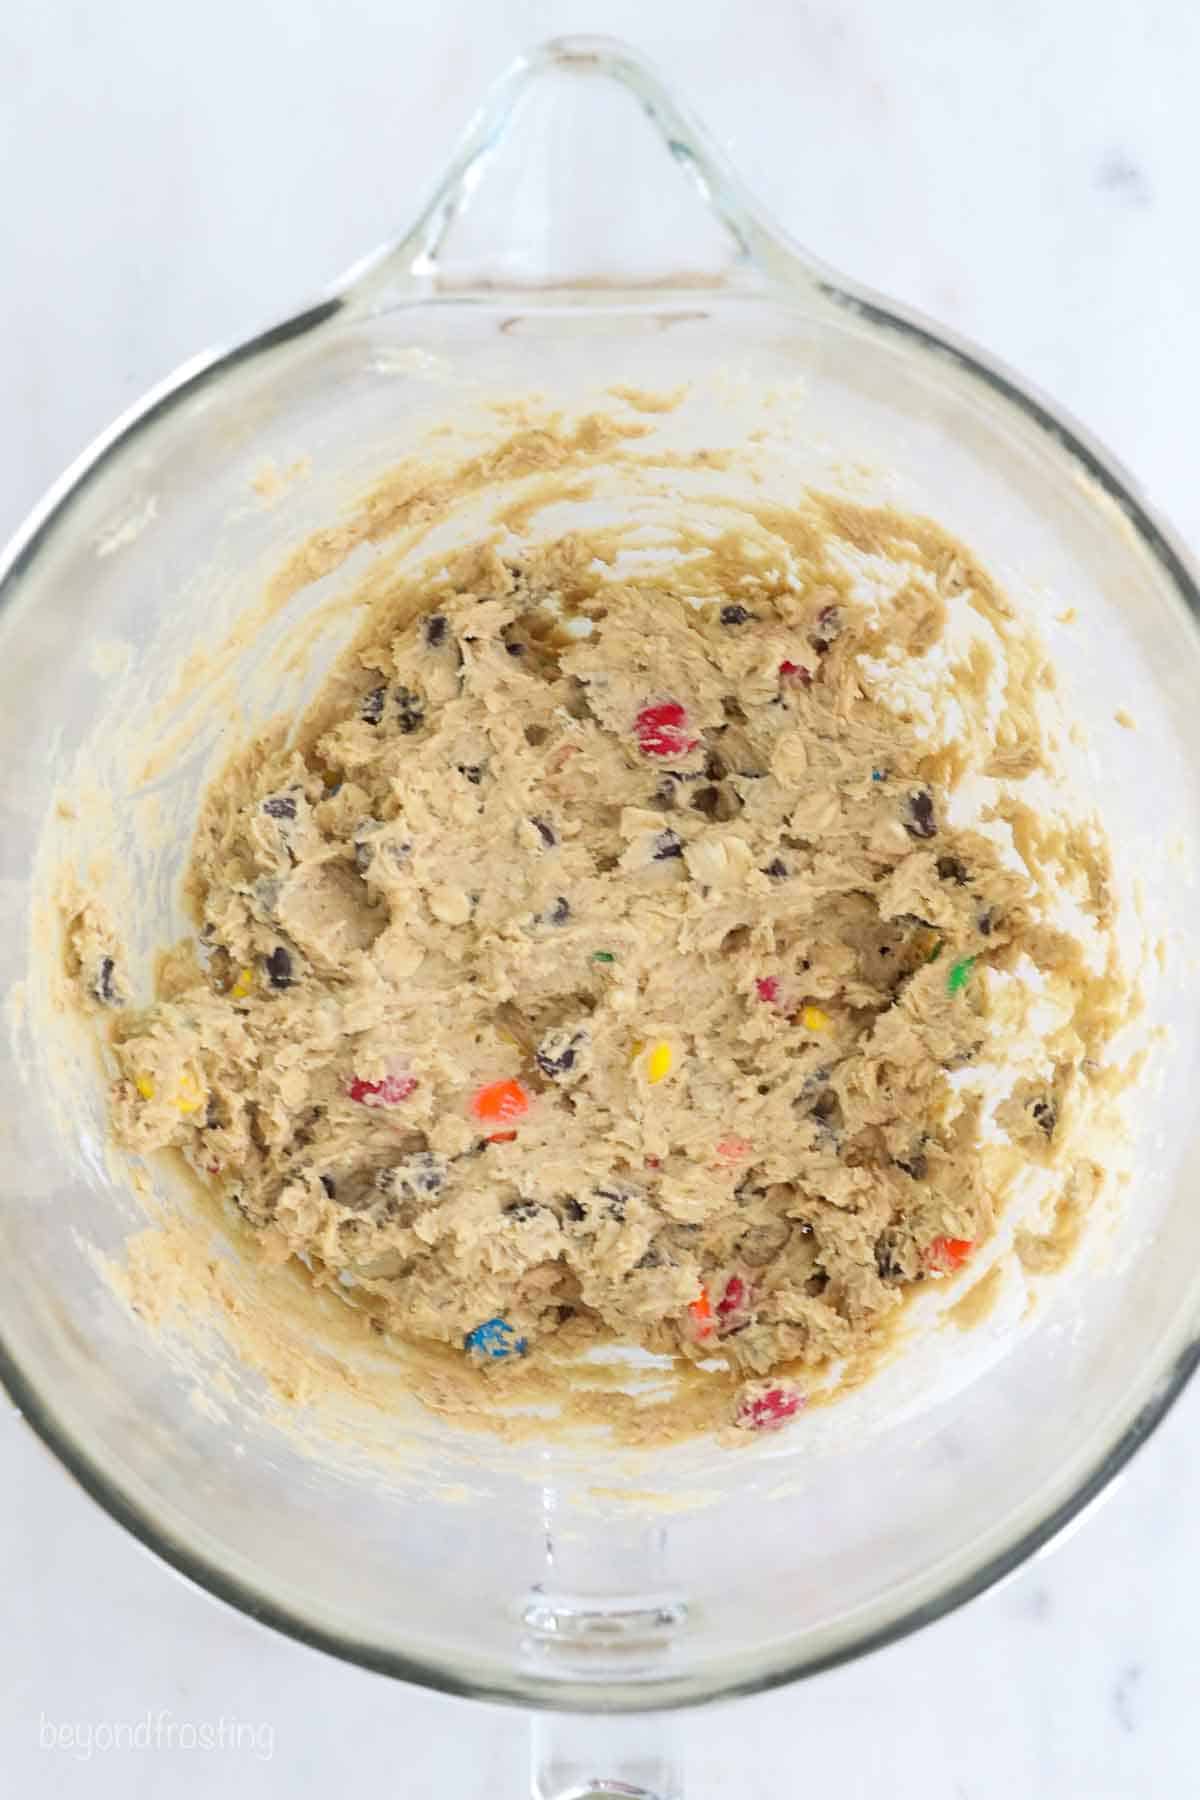 The fully mixed batter with the M&Ms and chocolate chips.